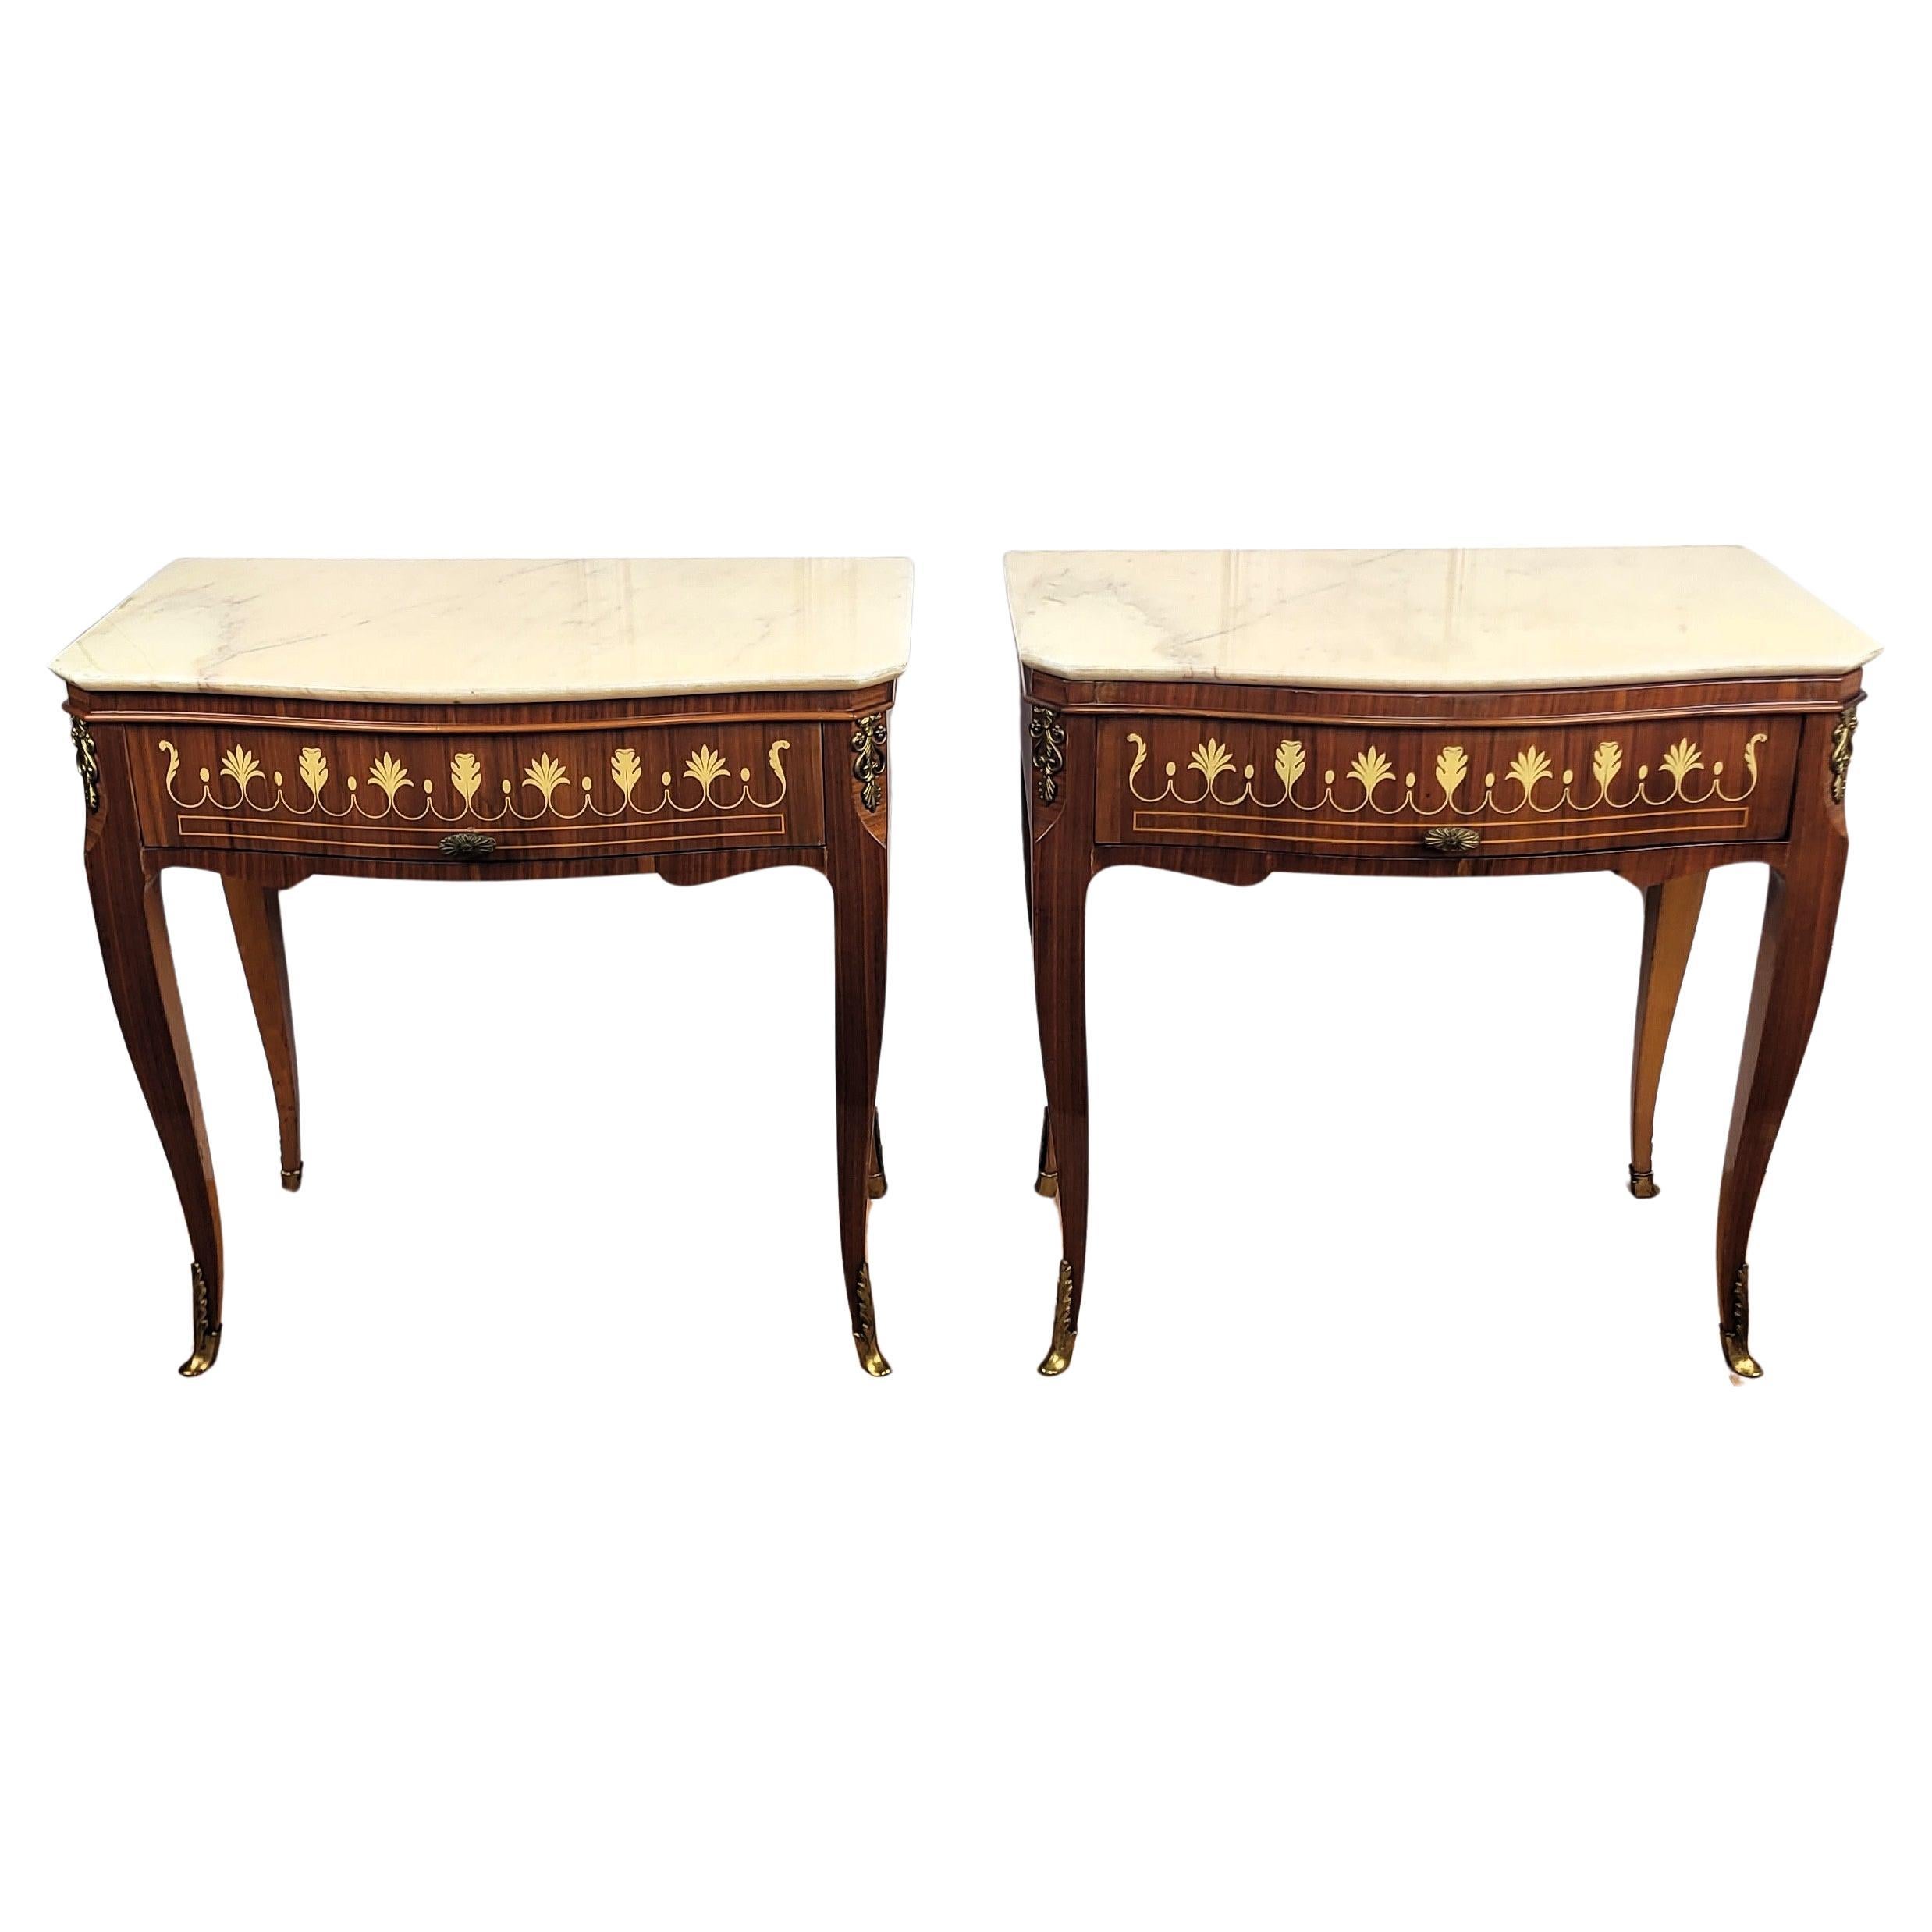 Pair of Italian Art Deco Marquetry Wood Marble Top Night Stands Bedside Tables